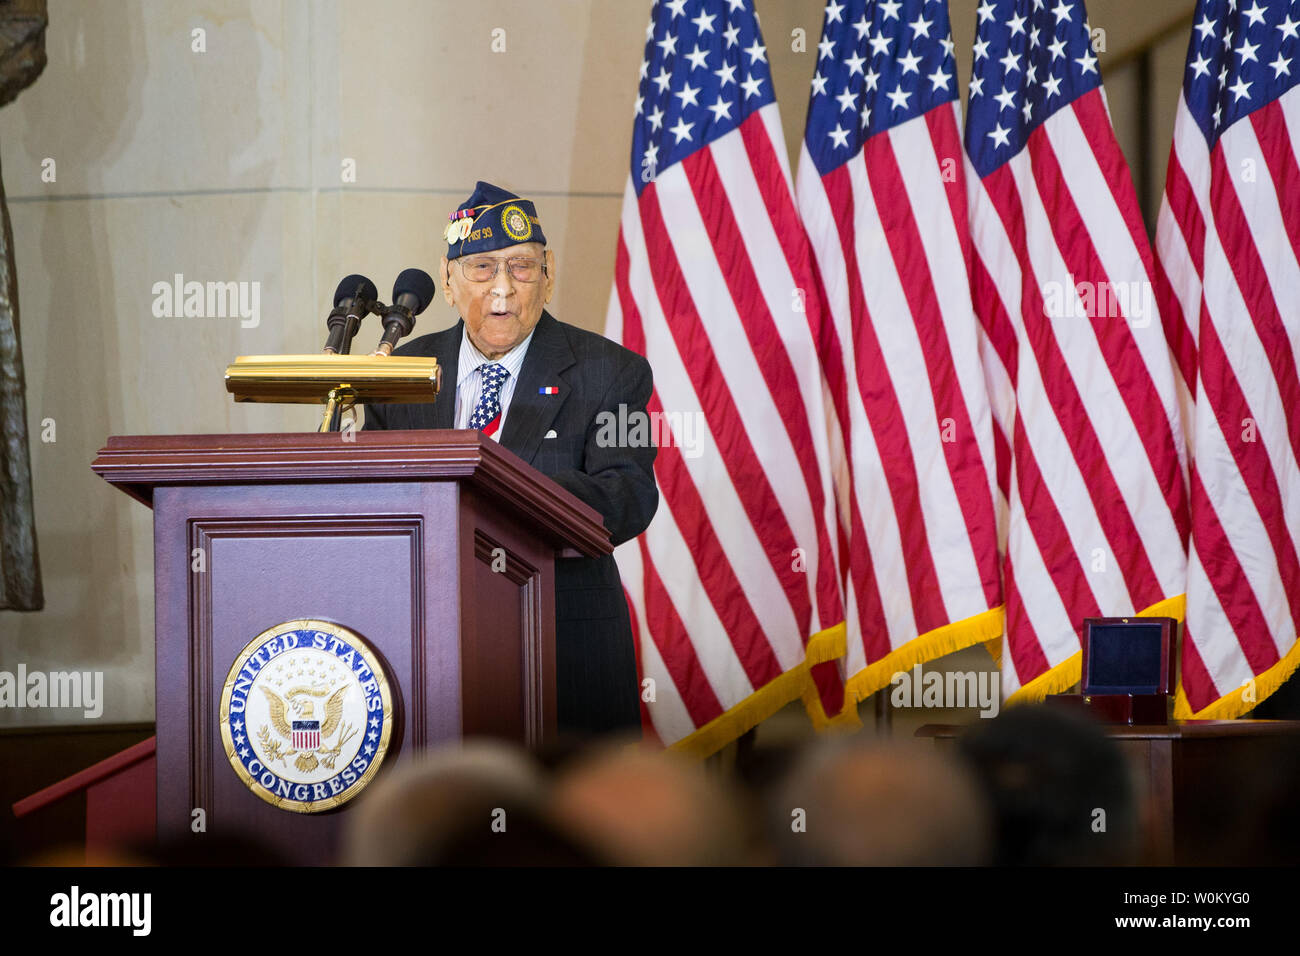 Celestino Almeda,  a Filipino World War II veteran representing the Philippine Commonwealth Army, speaks during a ceremony with House and Senate leaders to present a Congressional Gold Medal honoring Filipino veterans of World War II for their service and sacrifice during the war during a ceremony on Capitol Hill in Washington, DC on October 25, 2017. The medal is the highest civilian award and is being presented after a lengthy struggle for recognition of the service of 260,000 Filipinos who fought for the United States over 75 years ago. Photo by Erin Schaff/UPI Stock Photo